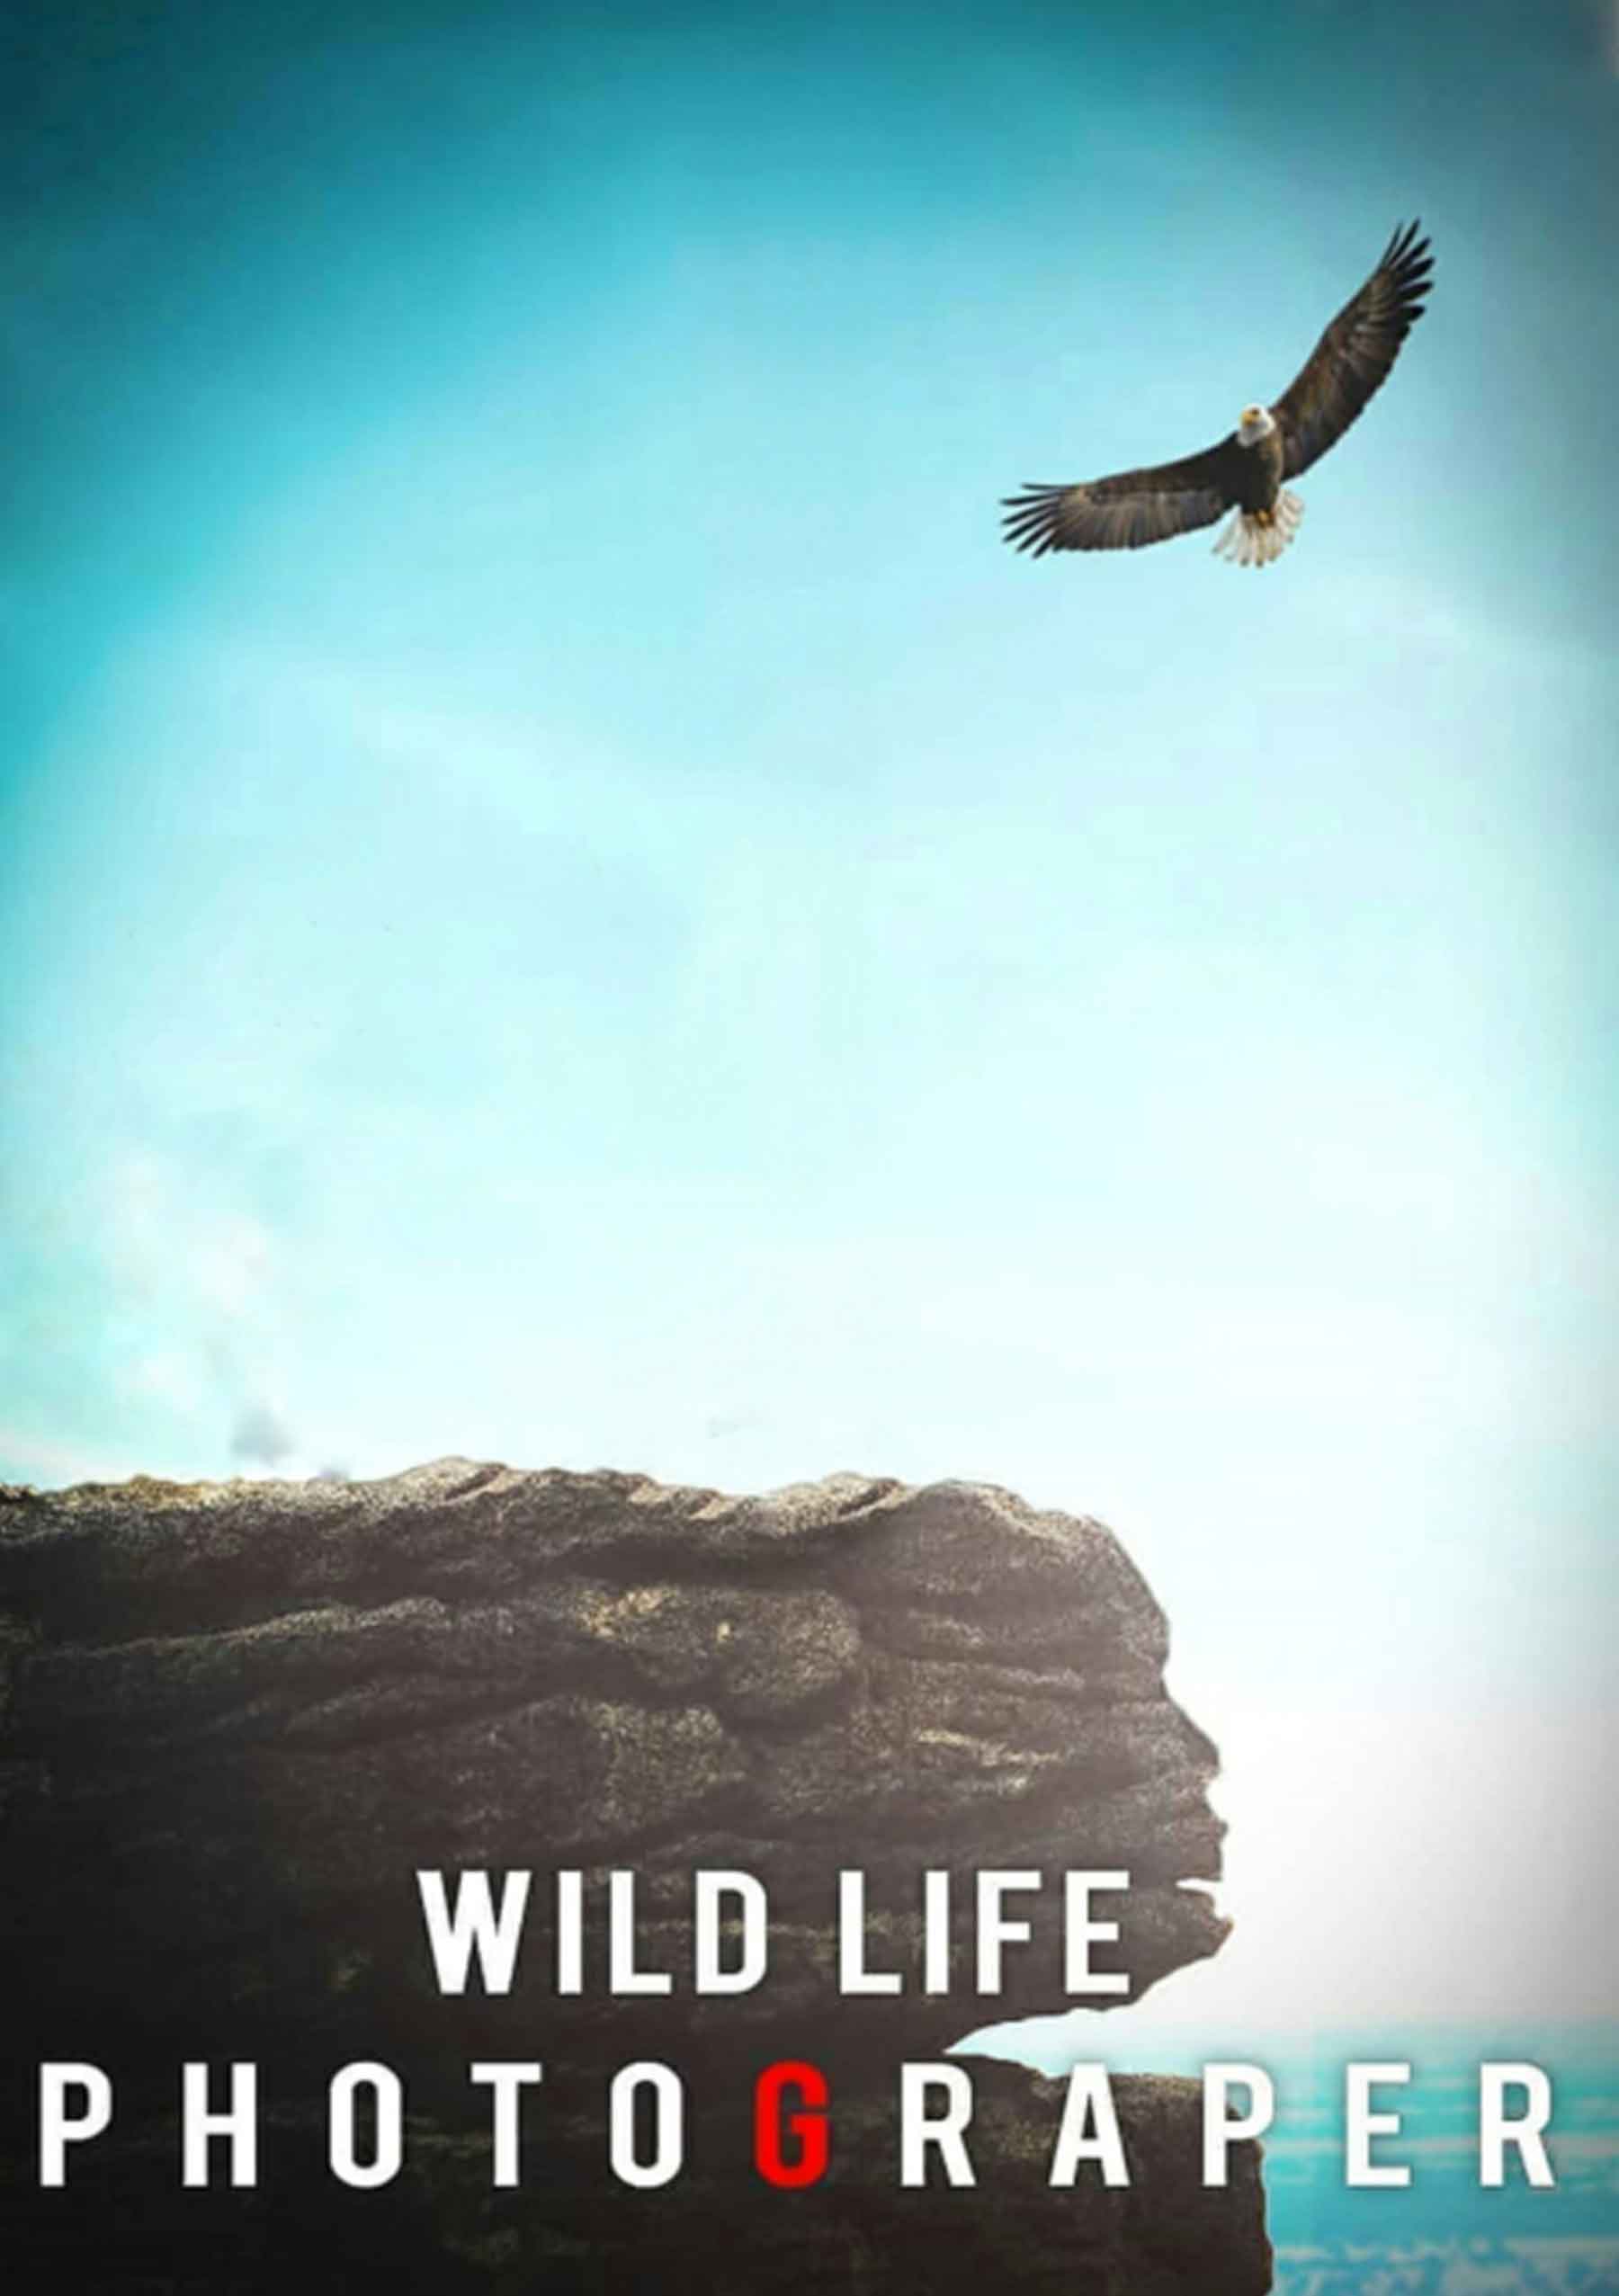 Wild Life New Background Free Stock Image [ Download ]